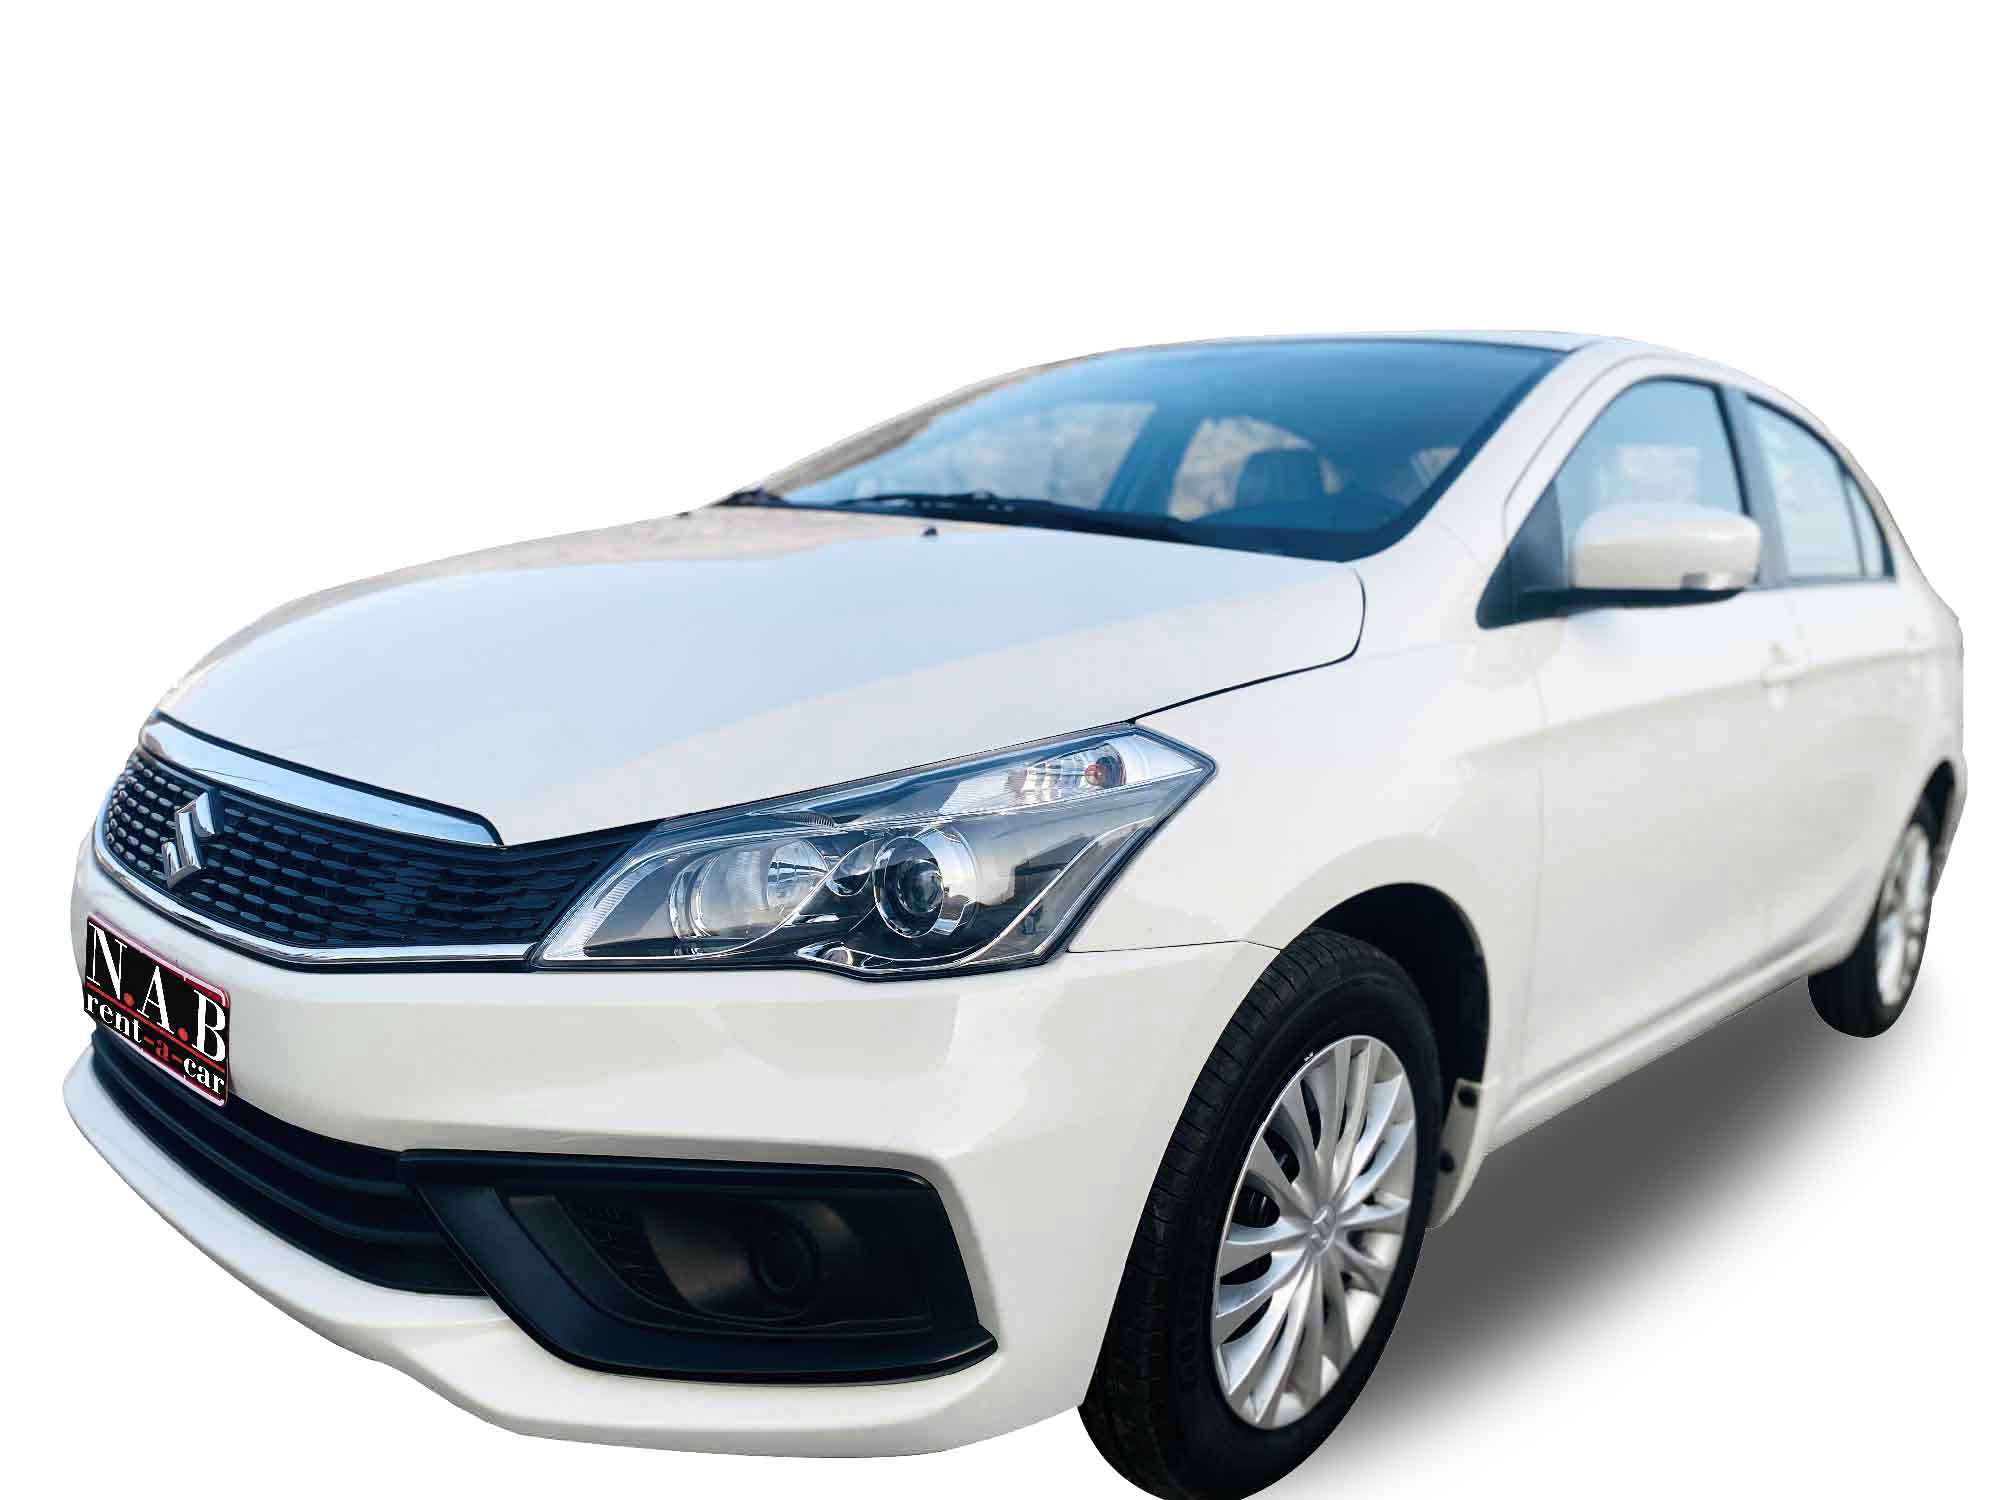 Muscat Airport car hire